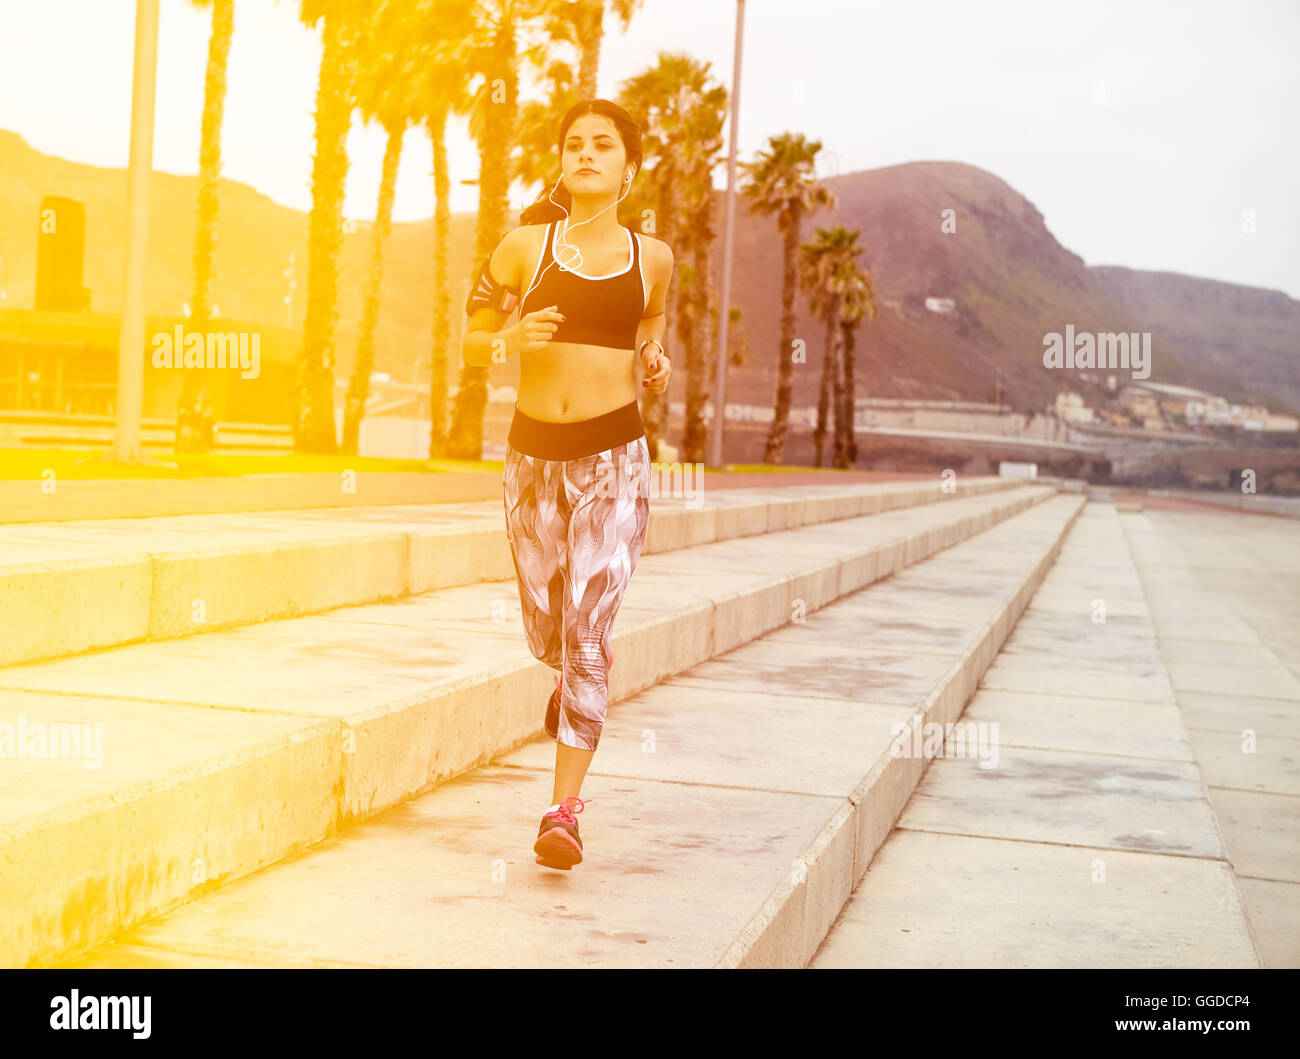 Young girl running on cement steps with palm trees behind her wearing casual clothes and her hair tied back Stock Photo